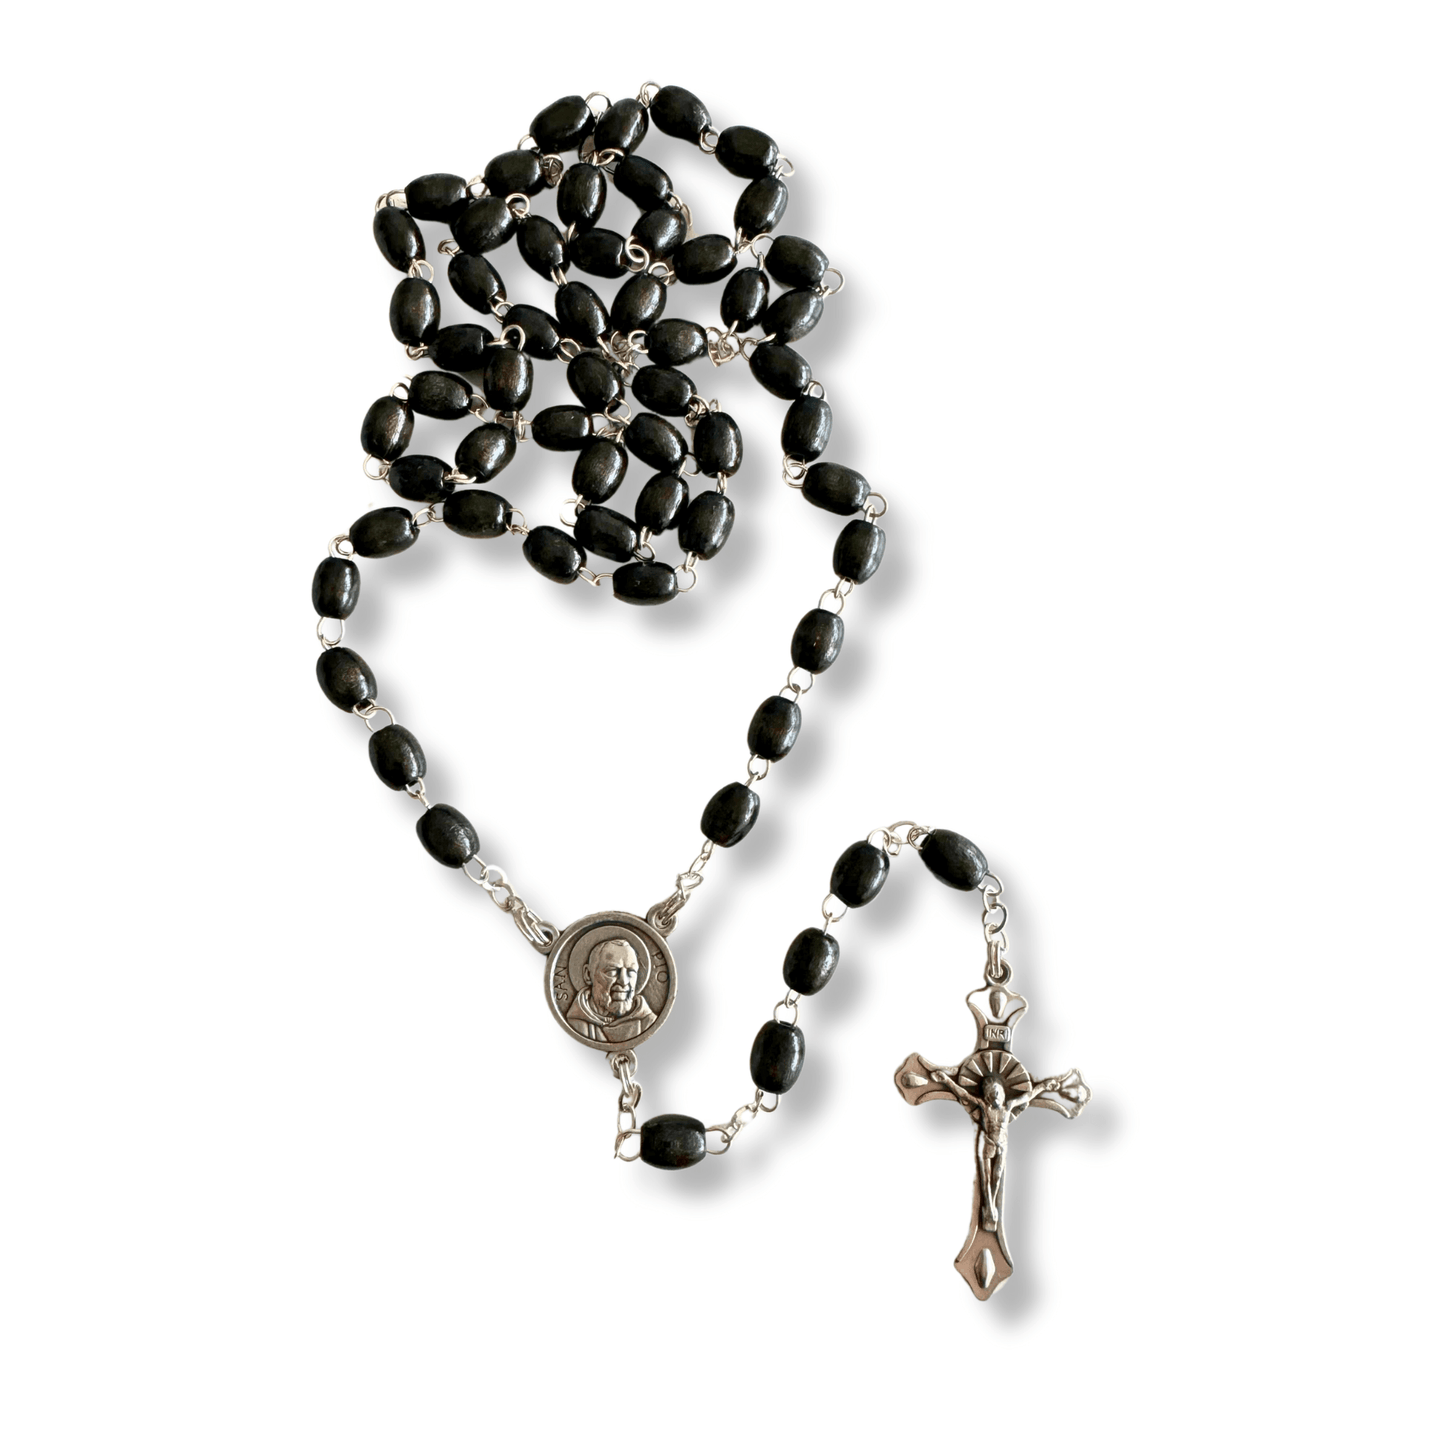 Catholically Rosaries San Padre Pio Rosary Blessed By Pope Benedict 2nd Class Relic -St. Father Pio